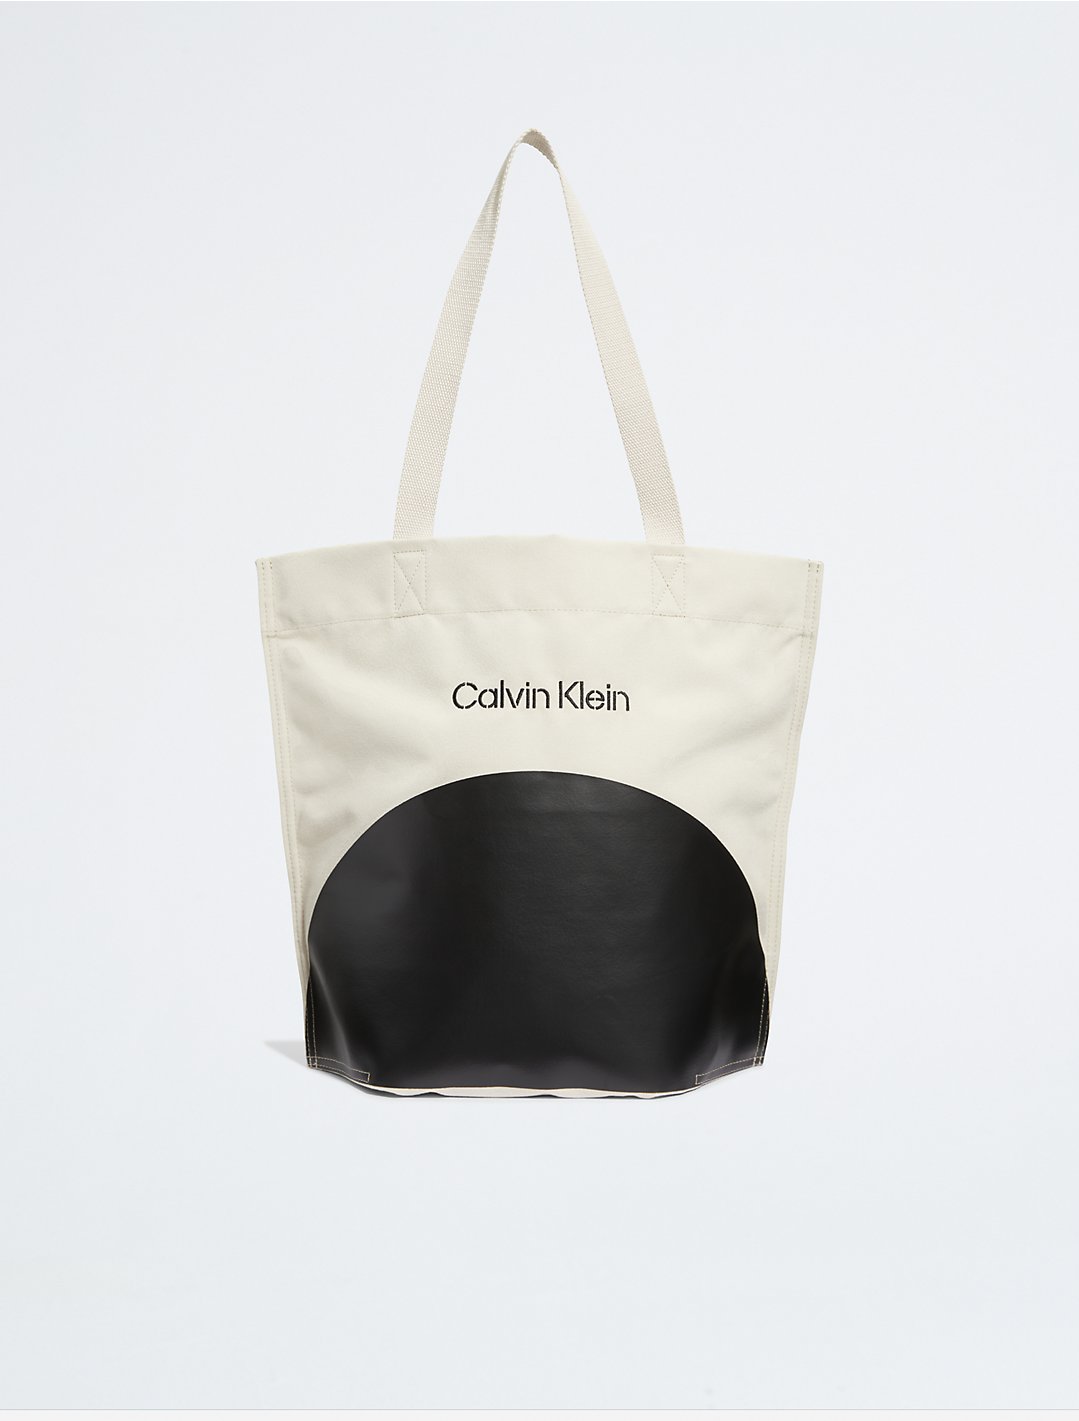 Geurig een experiment doen Rauw Canvas Contrast Graphic Pinched Tote Bag | Calvin Klein